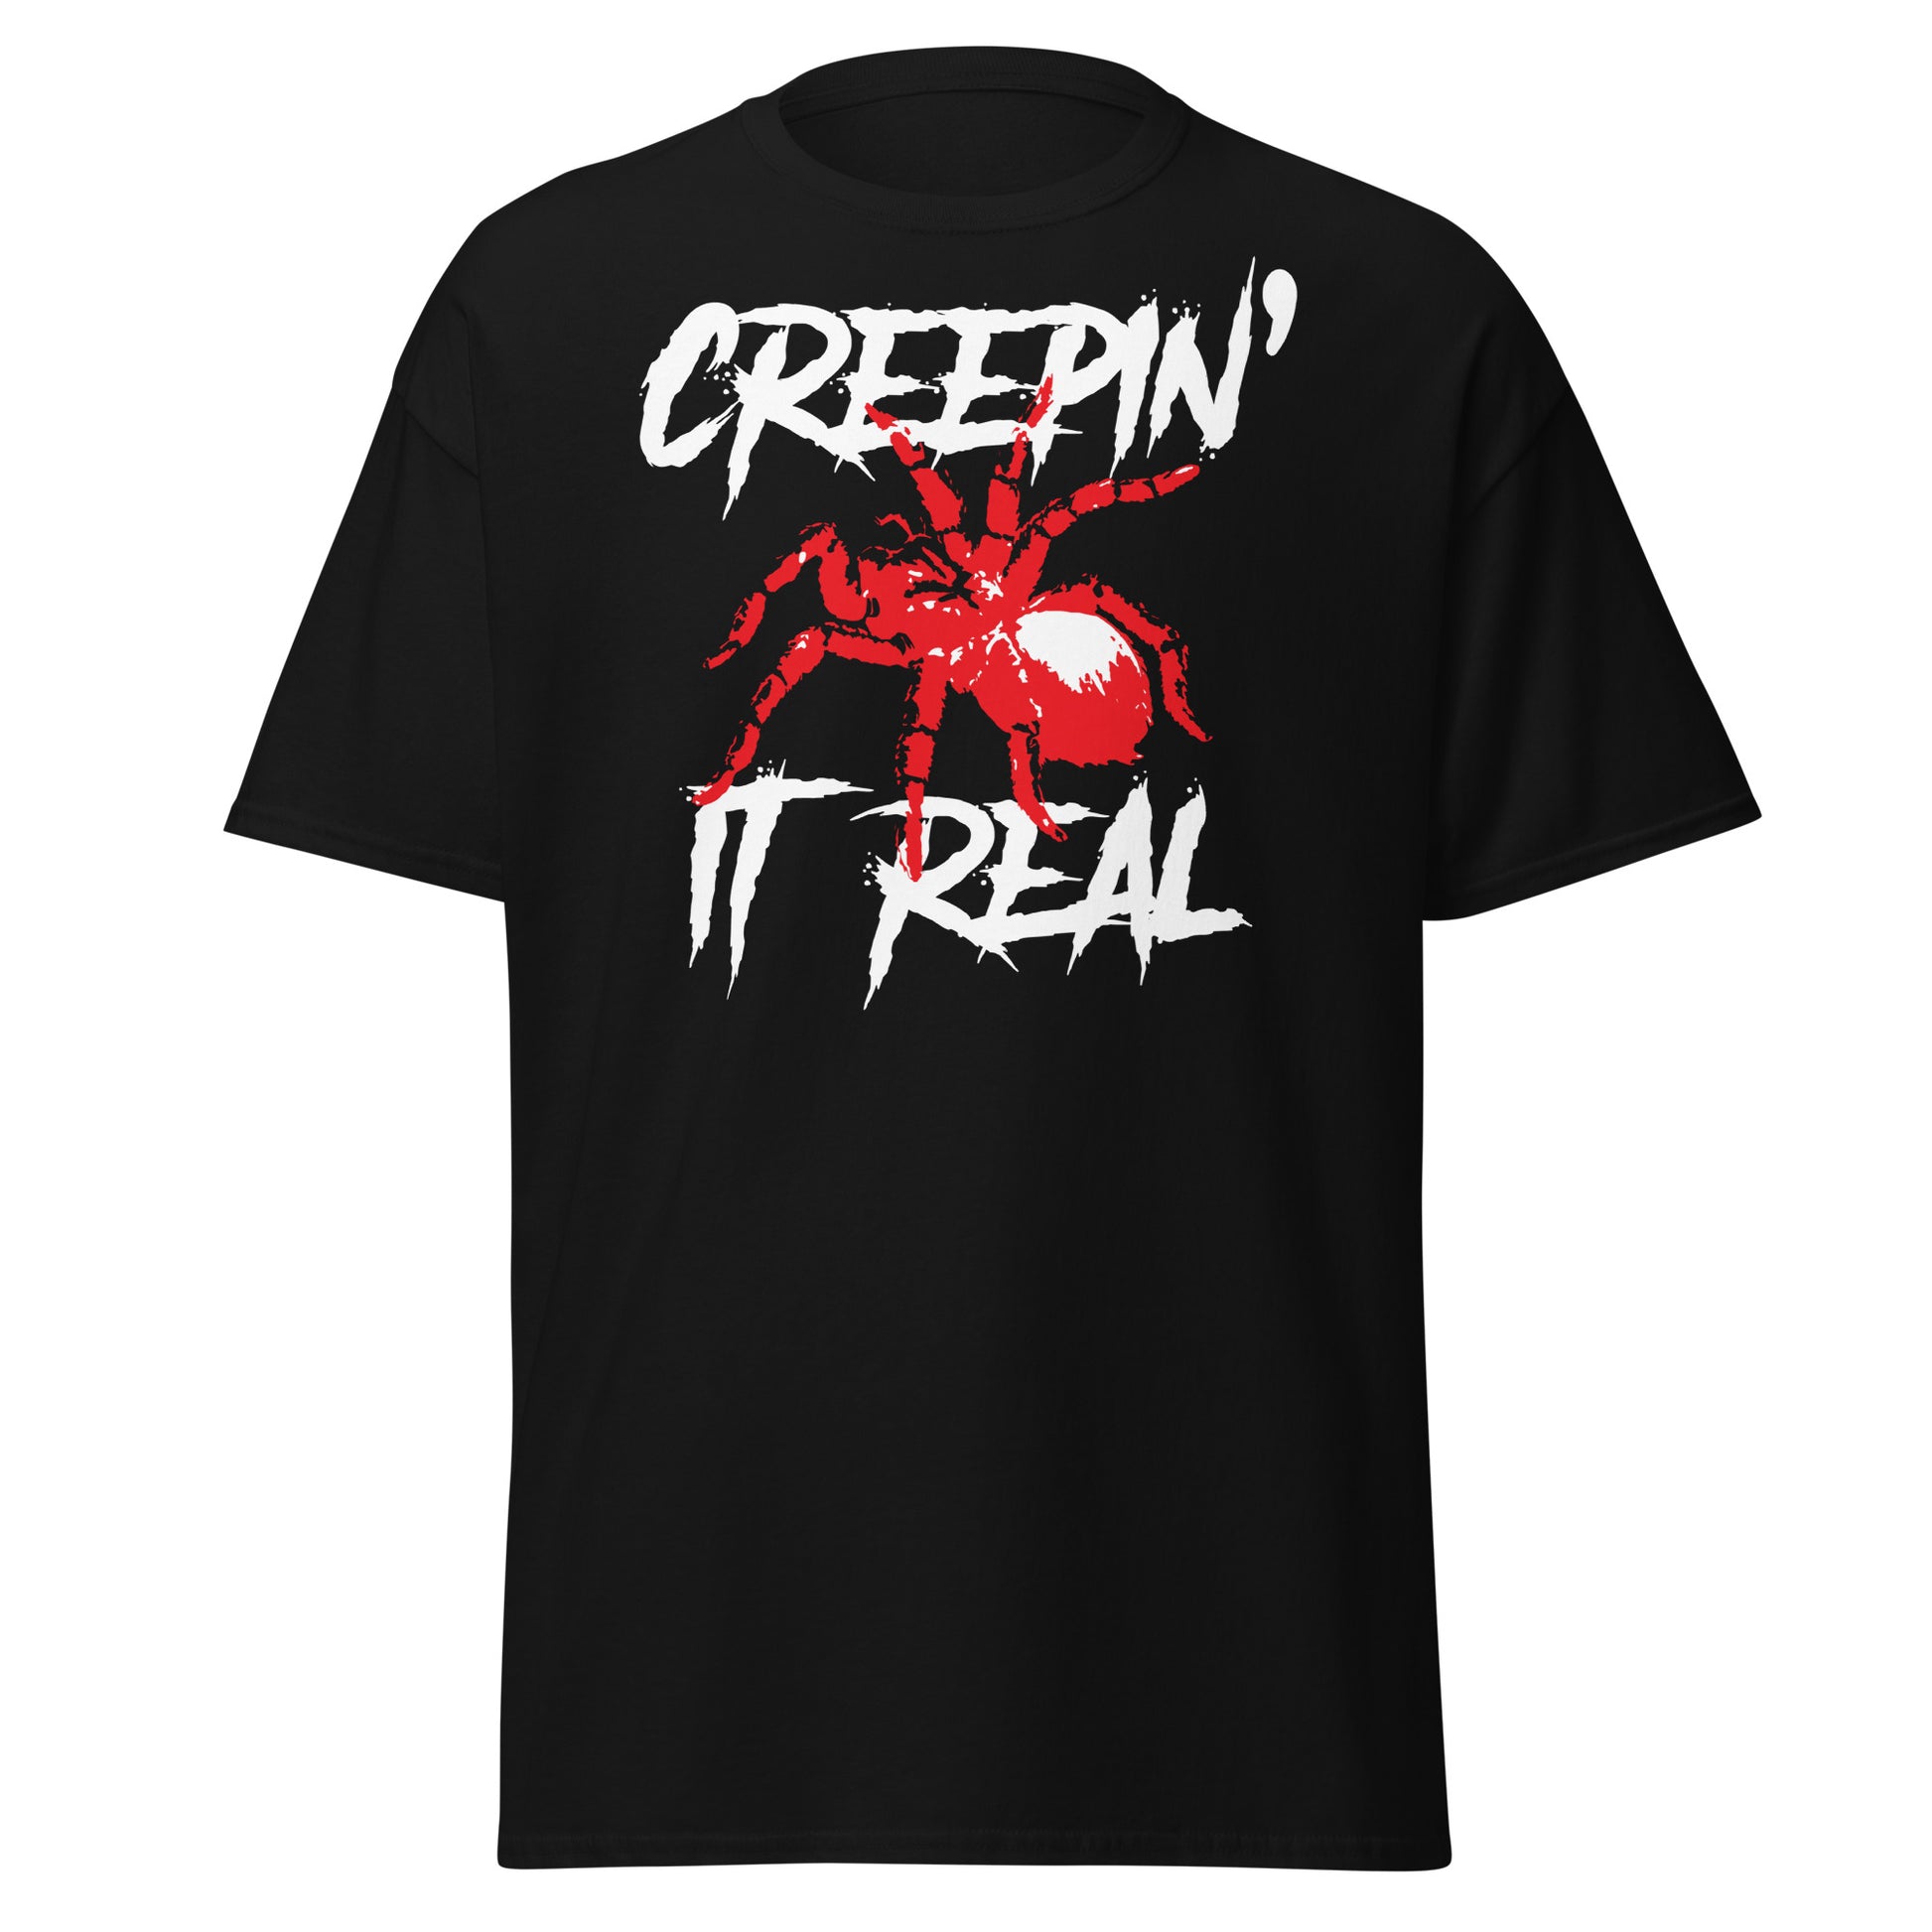 Creepin' It Real' Chic Tee - Soft Style